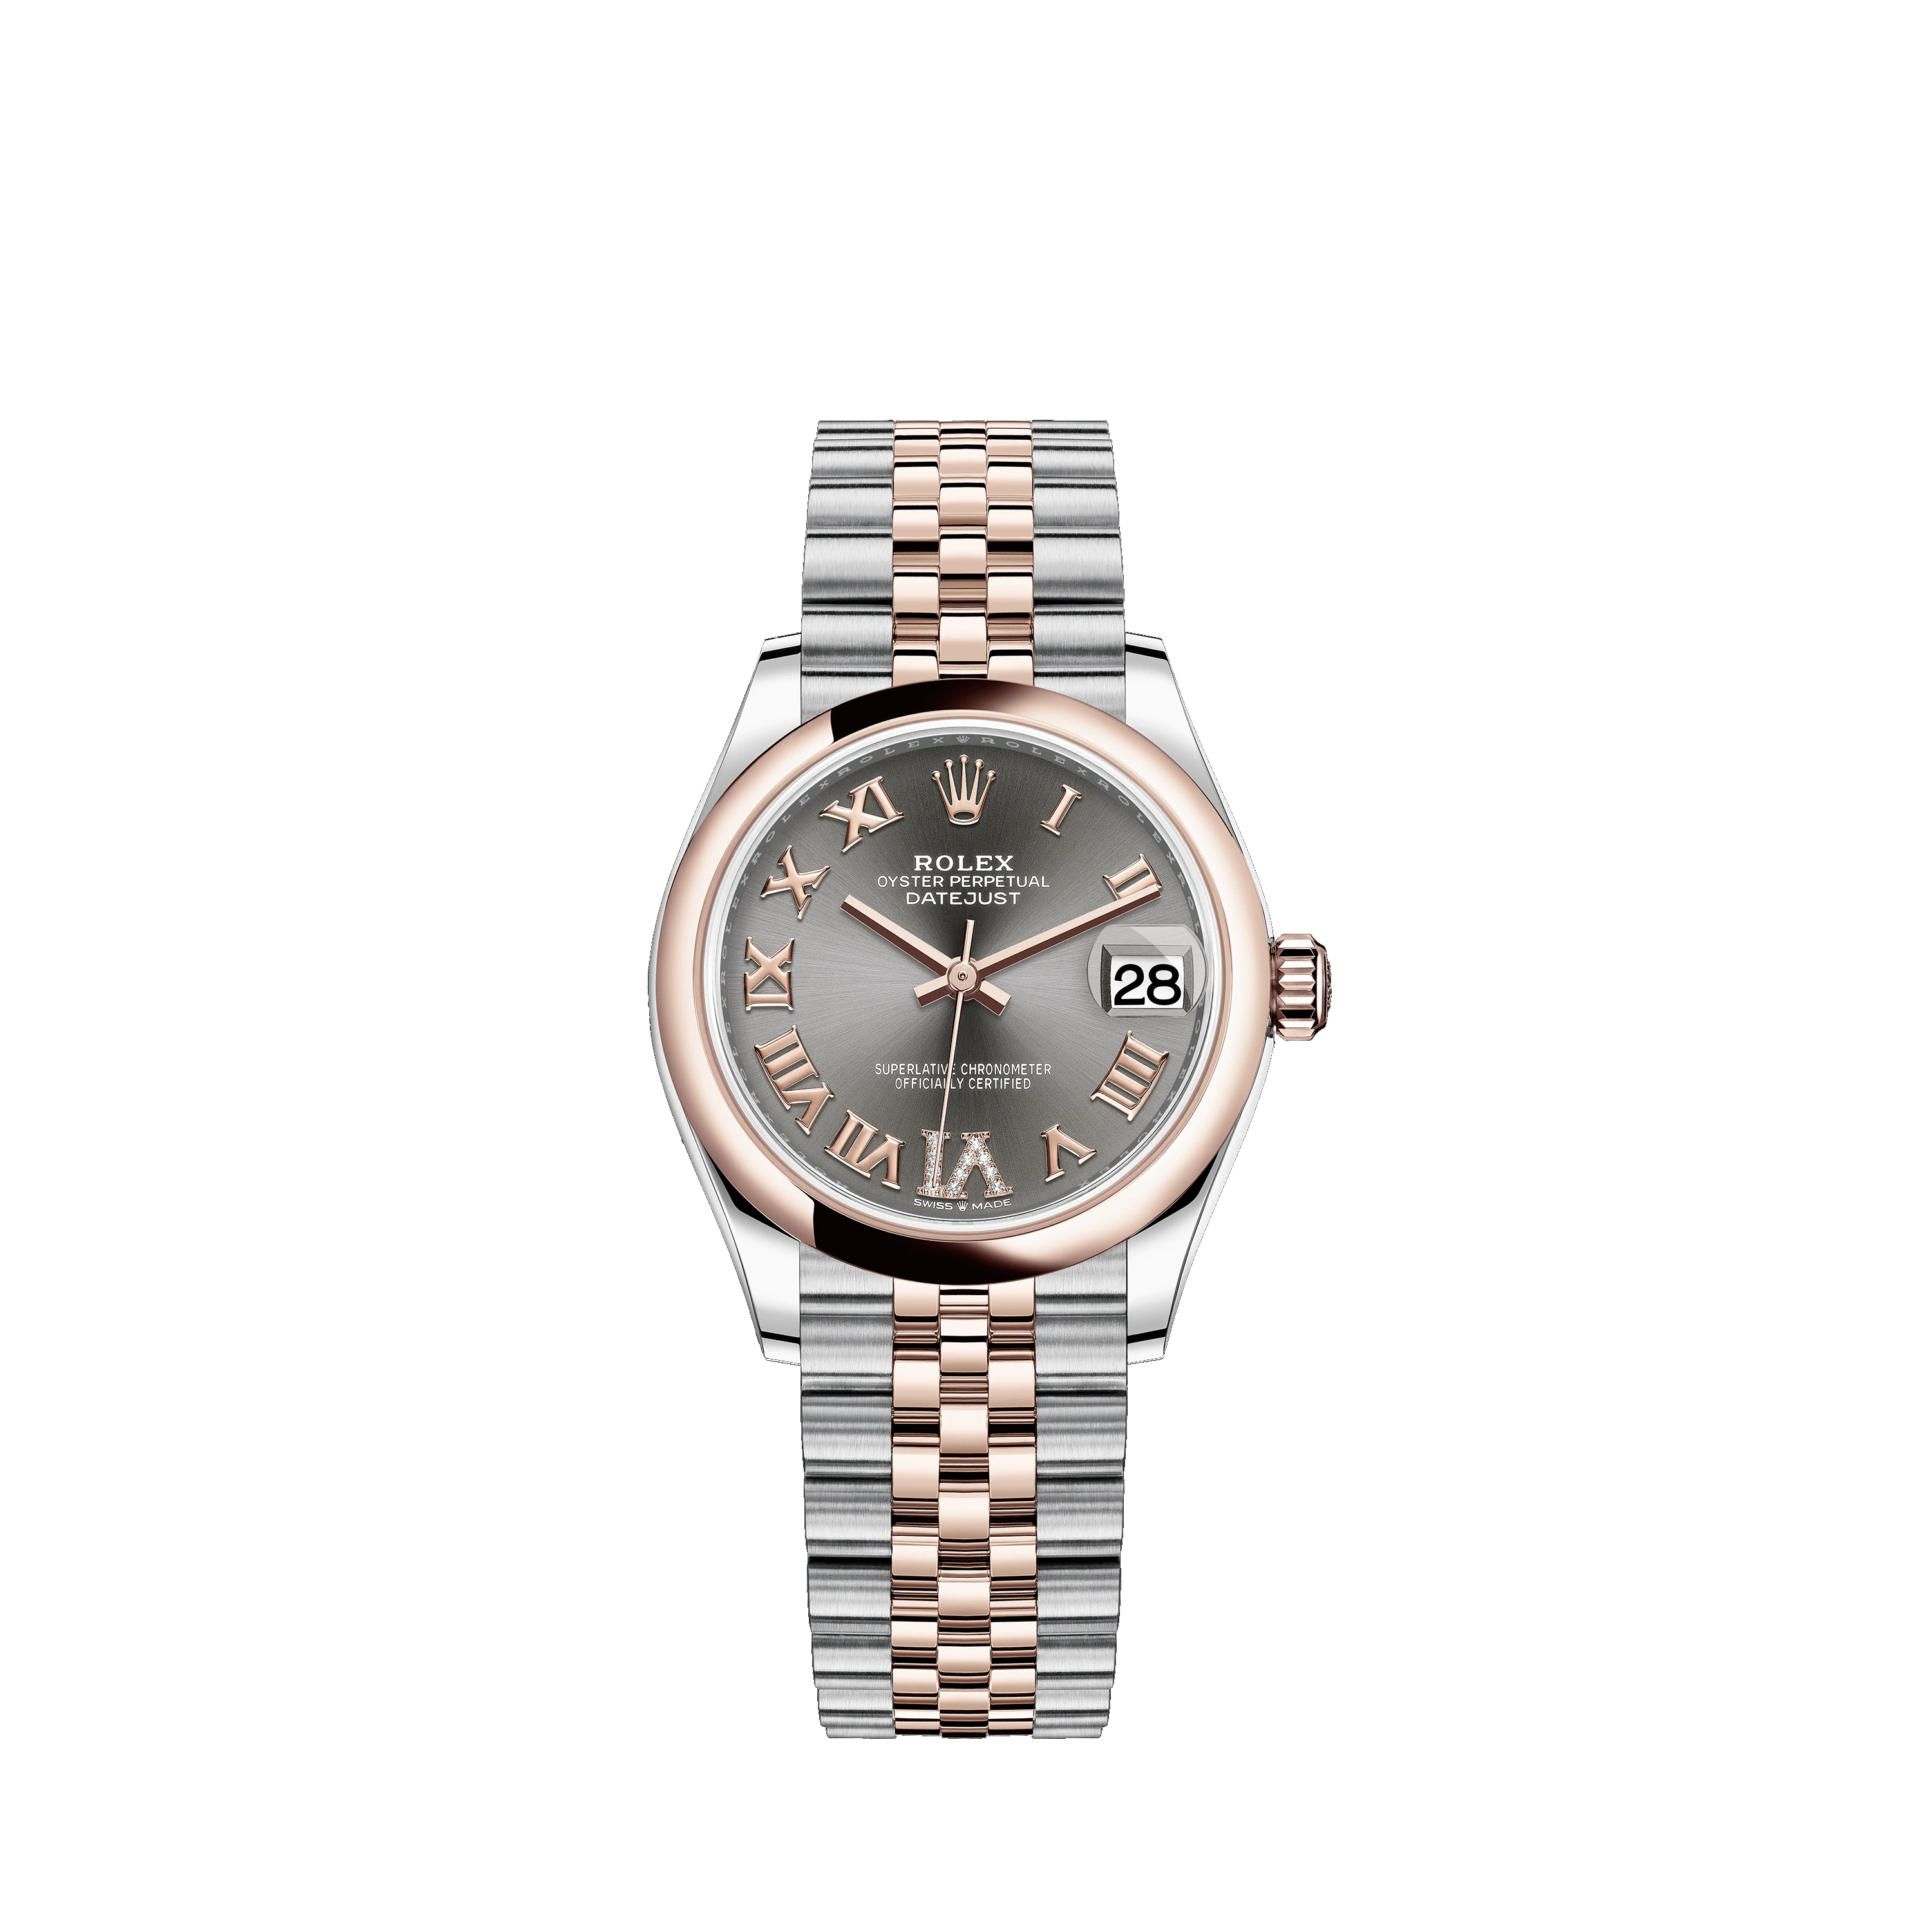 Datejust 31 278241 Rose Gold & Stainless Steel Watch (Rhodium Set with Diamonds)